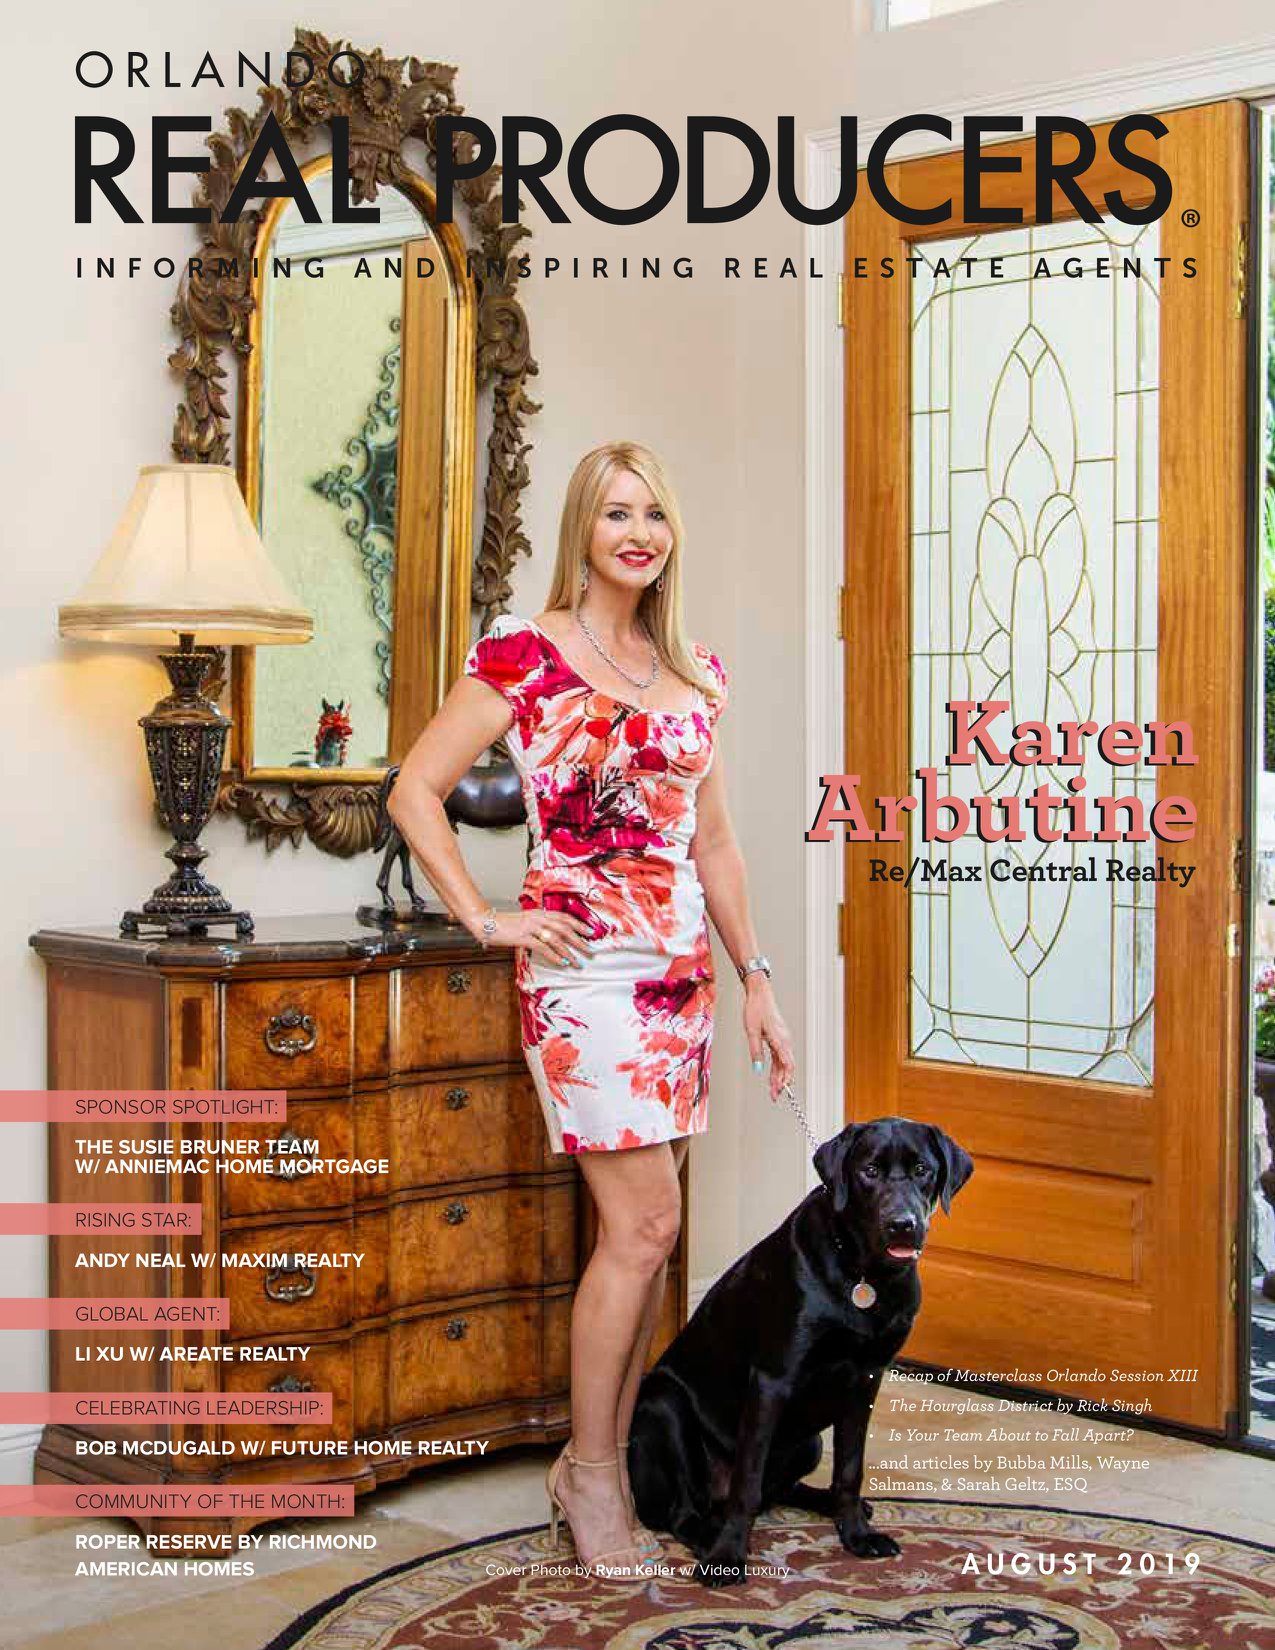 Orlando Real Producers' August 2019 Cover with Karen Arbutine